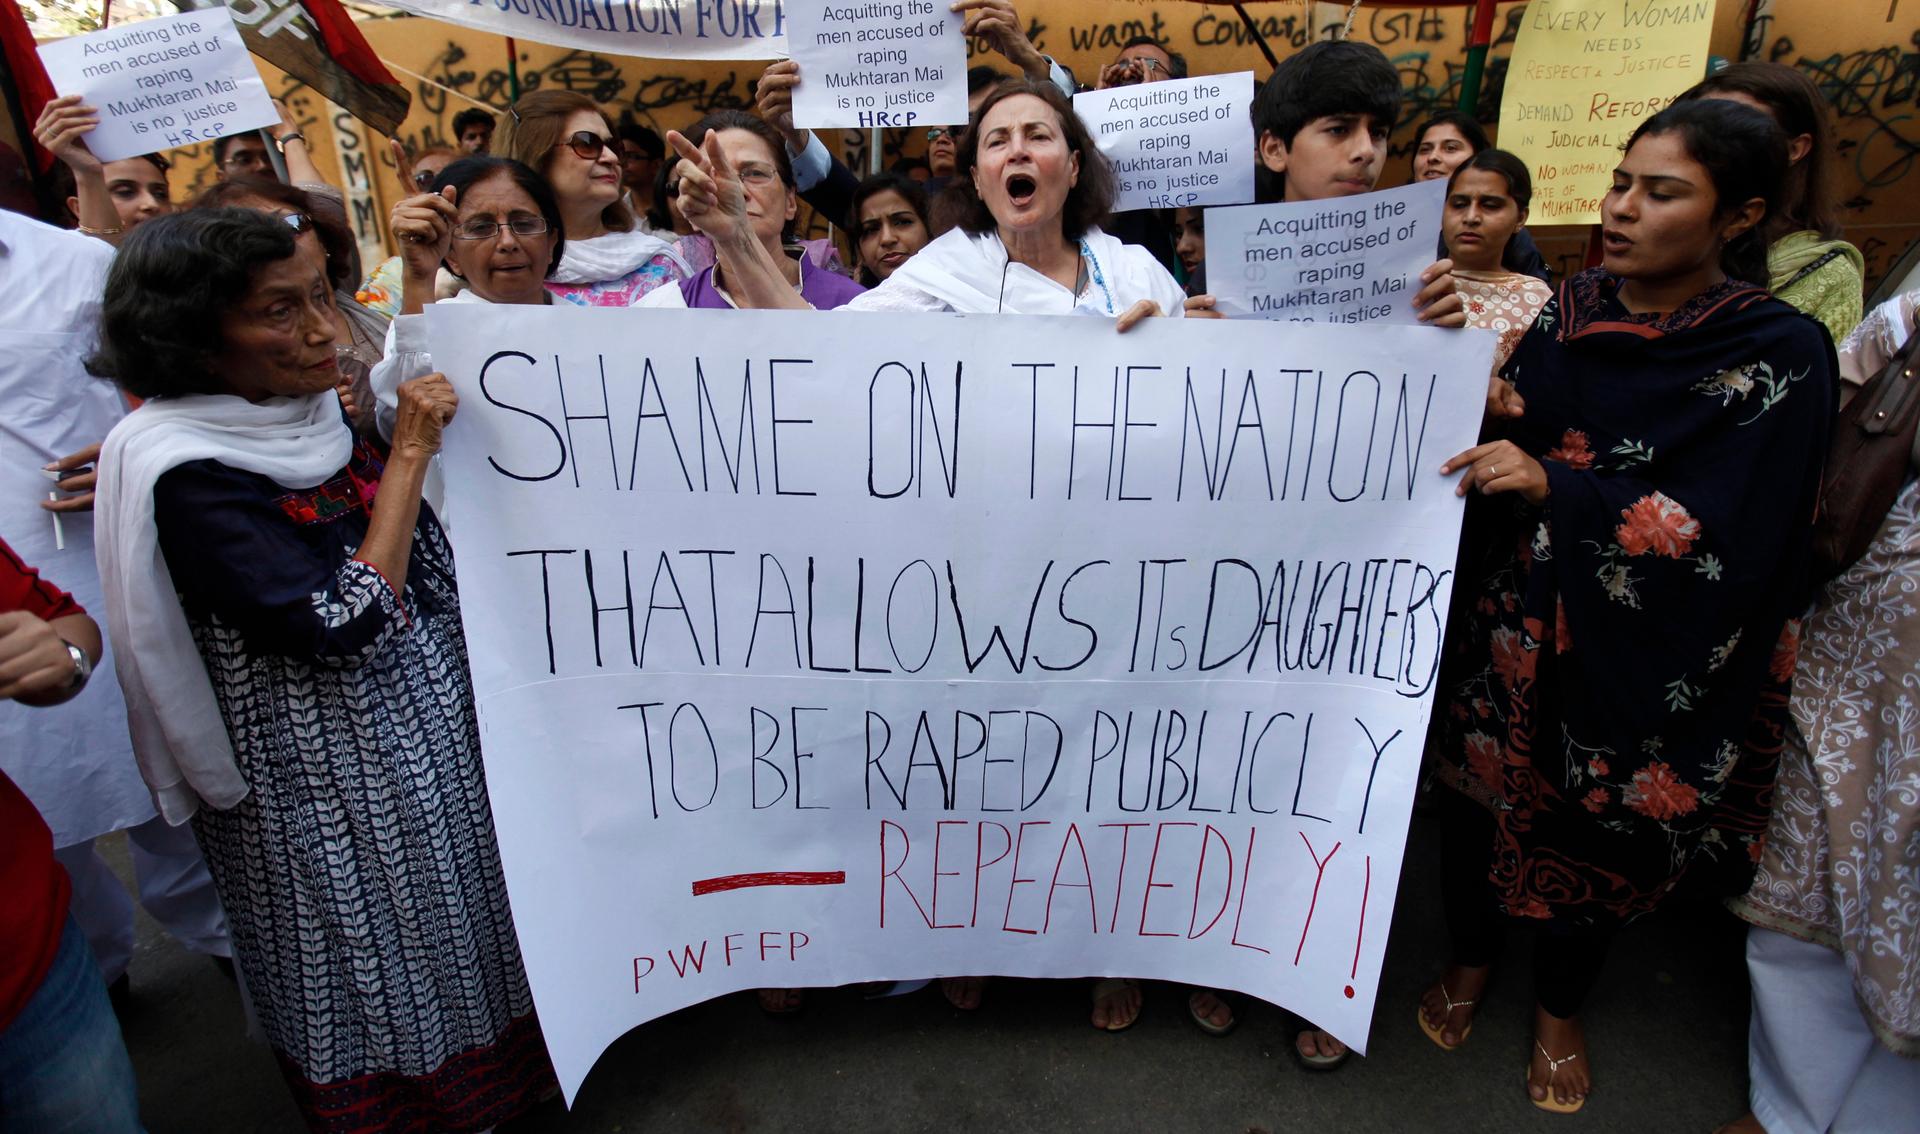 Activists hold a banner during a protest rally against a court decision involving Mukhtaran Mai, a victim of a village council-sanctioned gang-rape, in Karachi, Pakistan April 23, 2011.